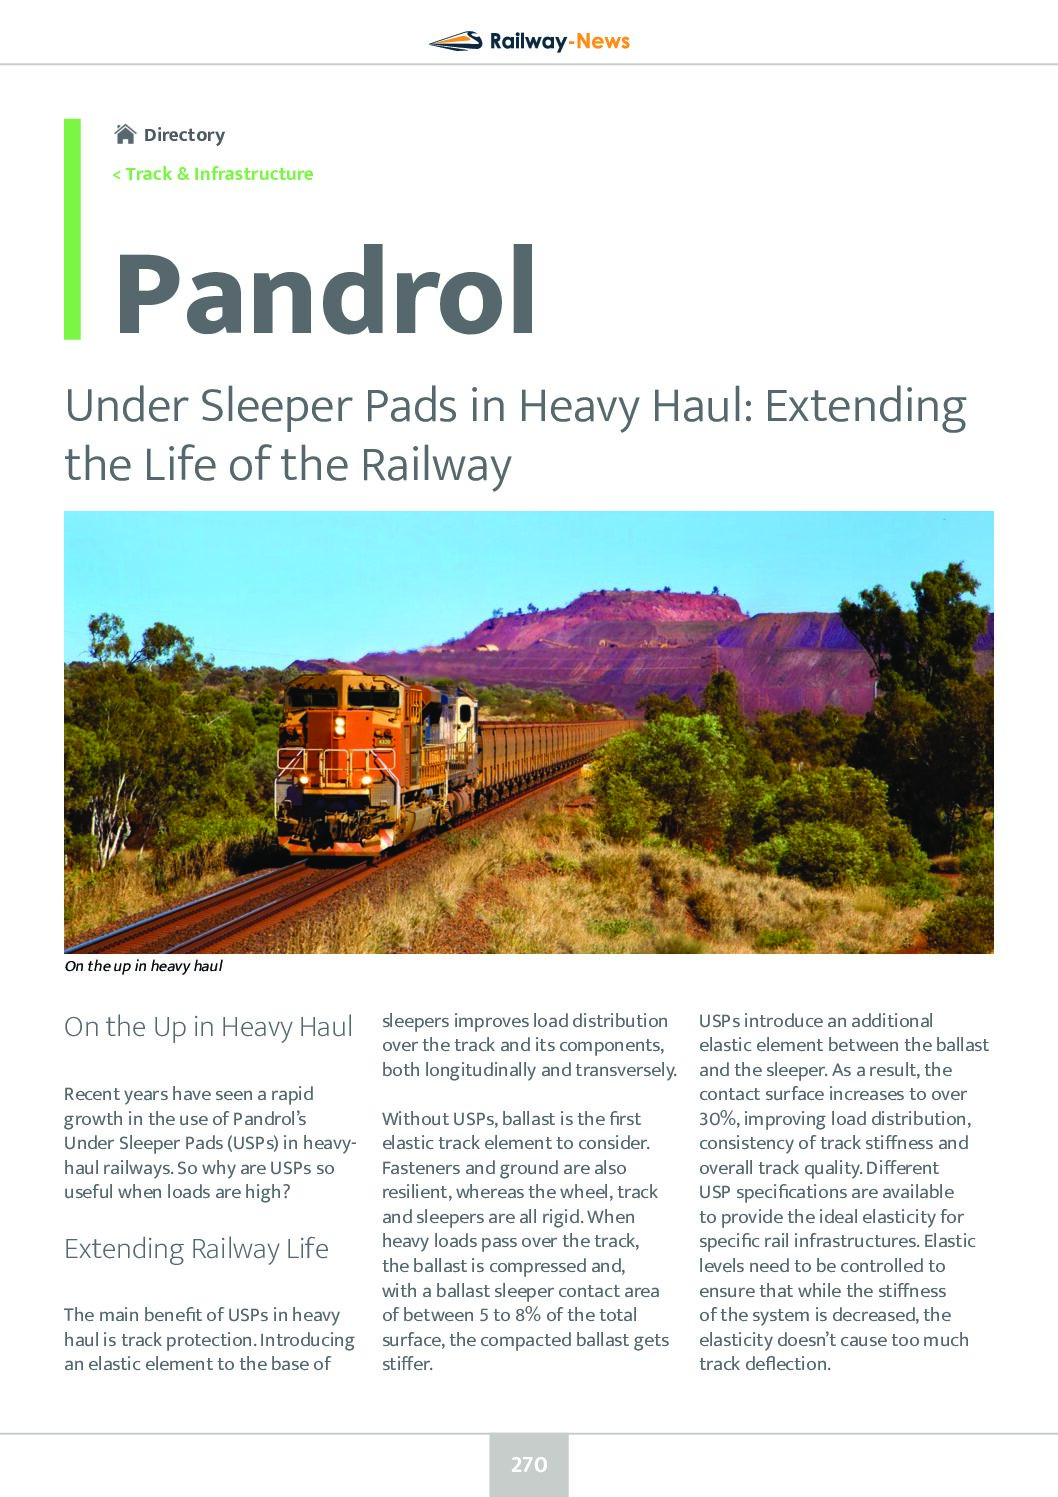 Under Sleeper Pads in Heavy Haul: Extending the Life of the Railway